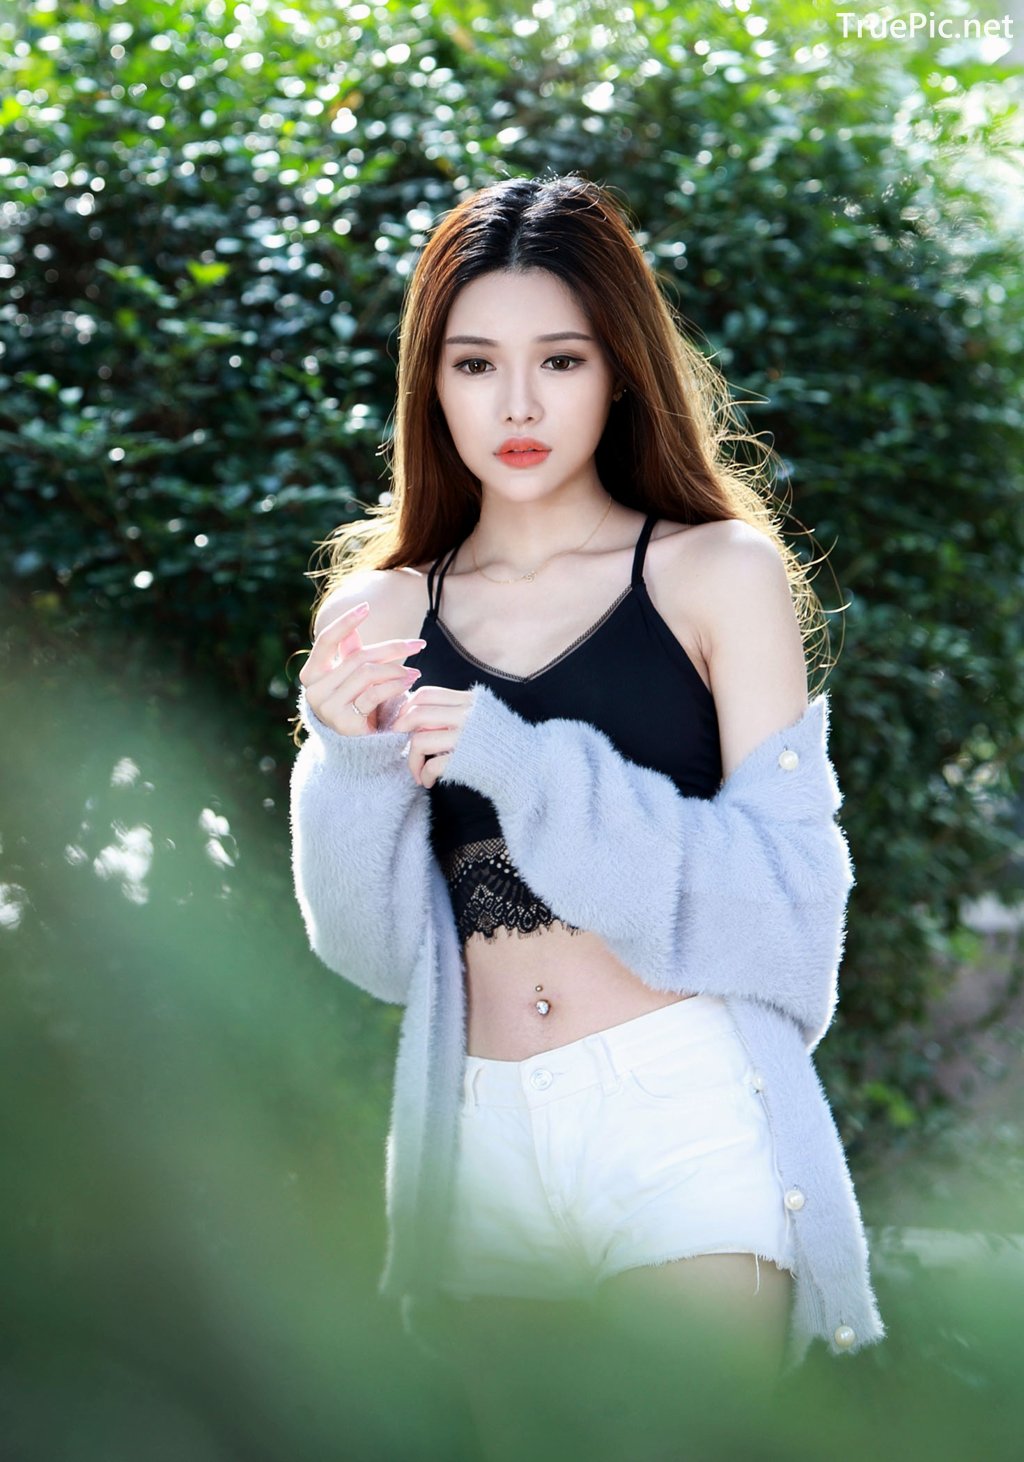 Image-Taiwanese-Model–莊舒潔–Hot-White-Short-Pants-and-Black-Crop-Top-TruePic.net- Picture-34